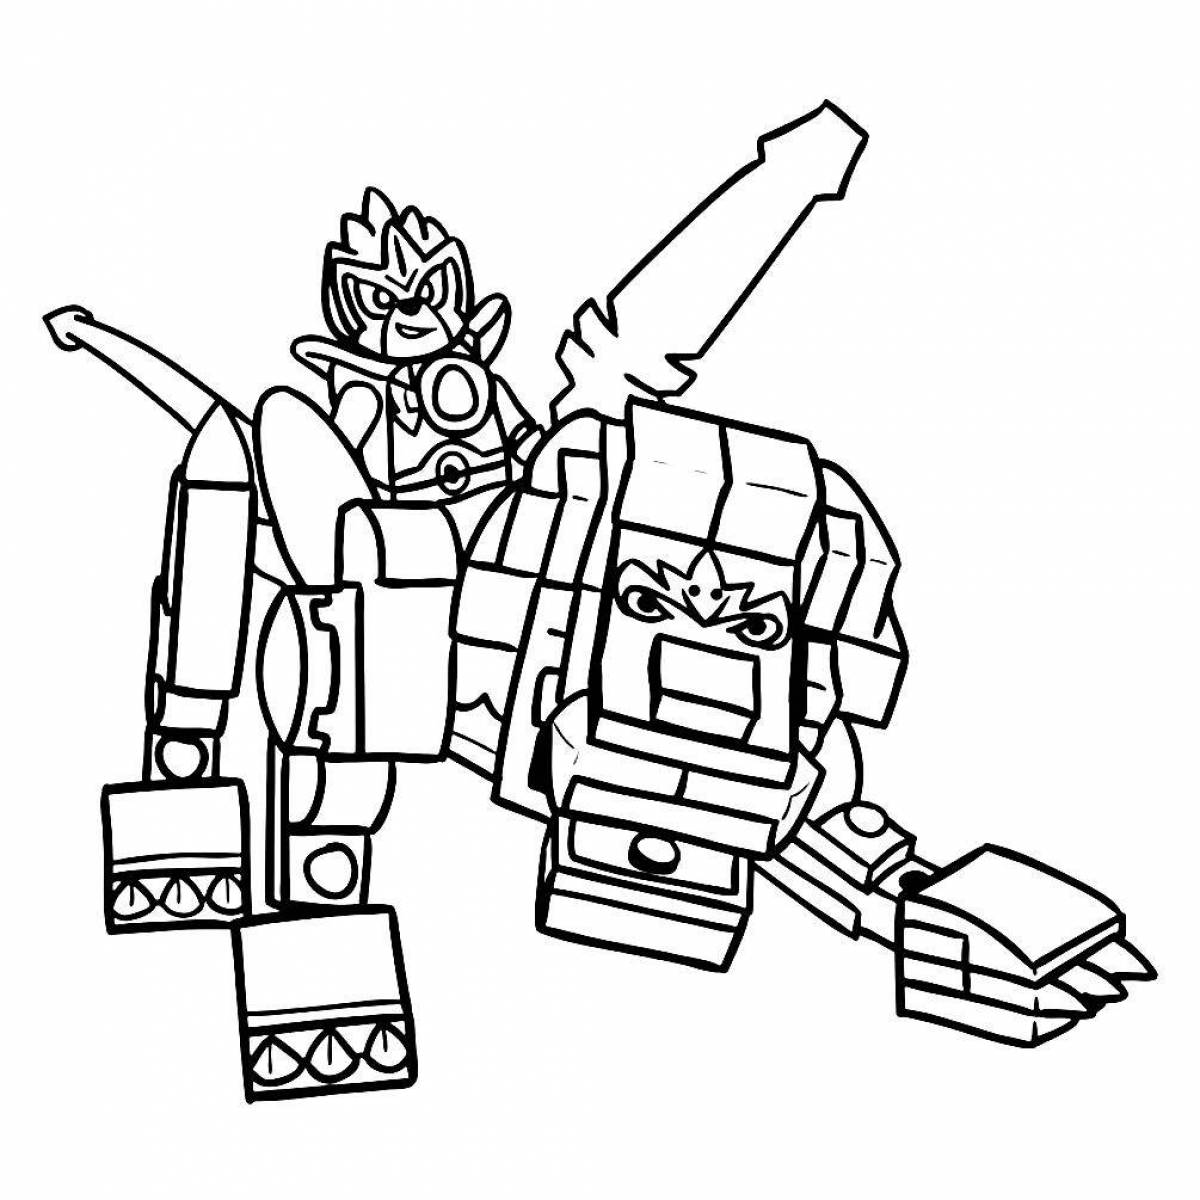 Playful lego chima coloring page